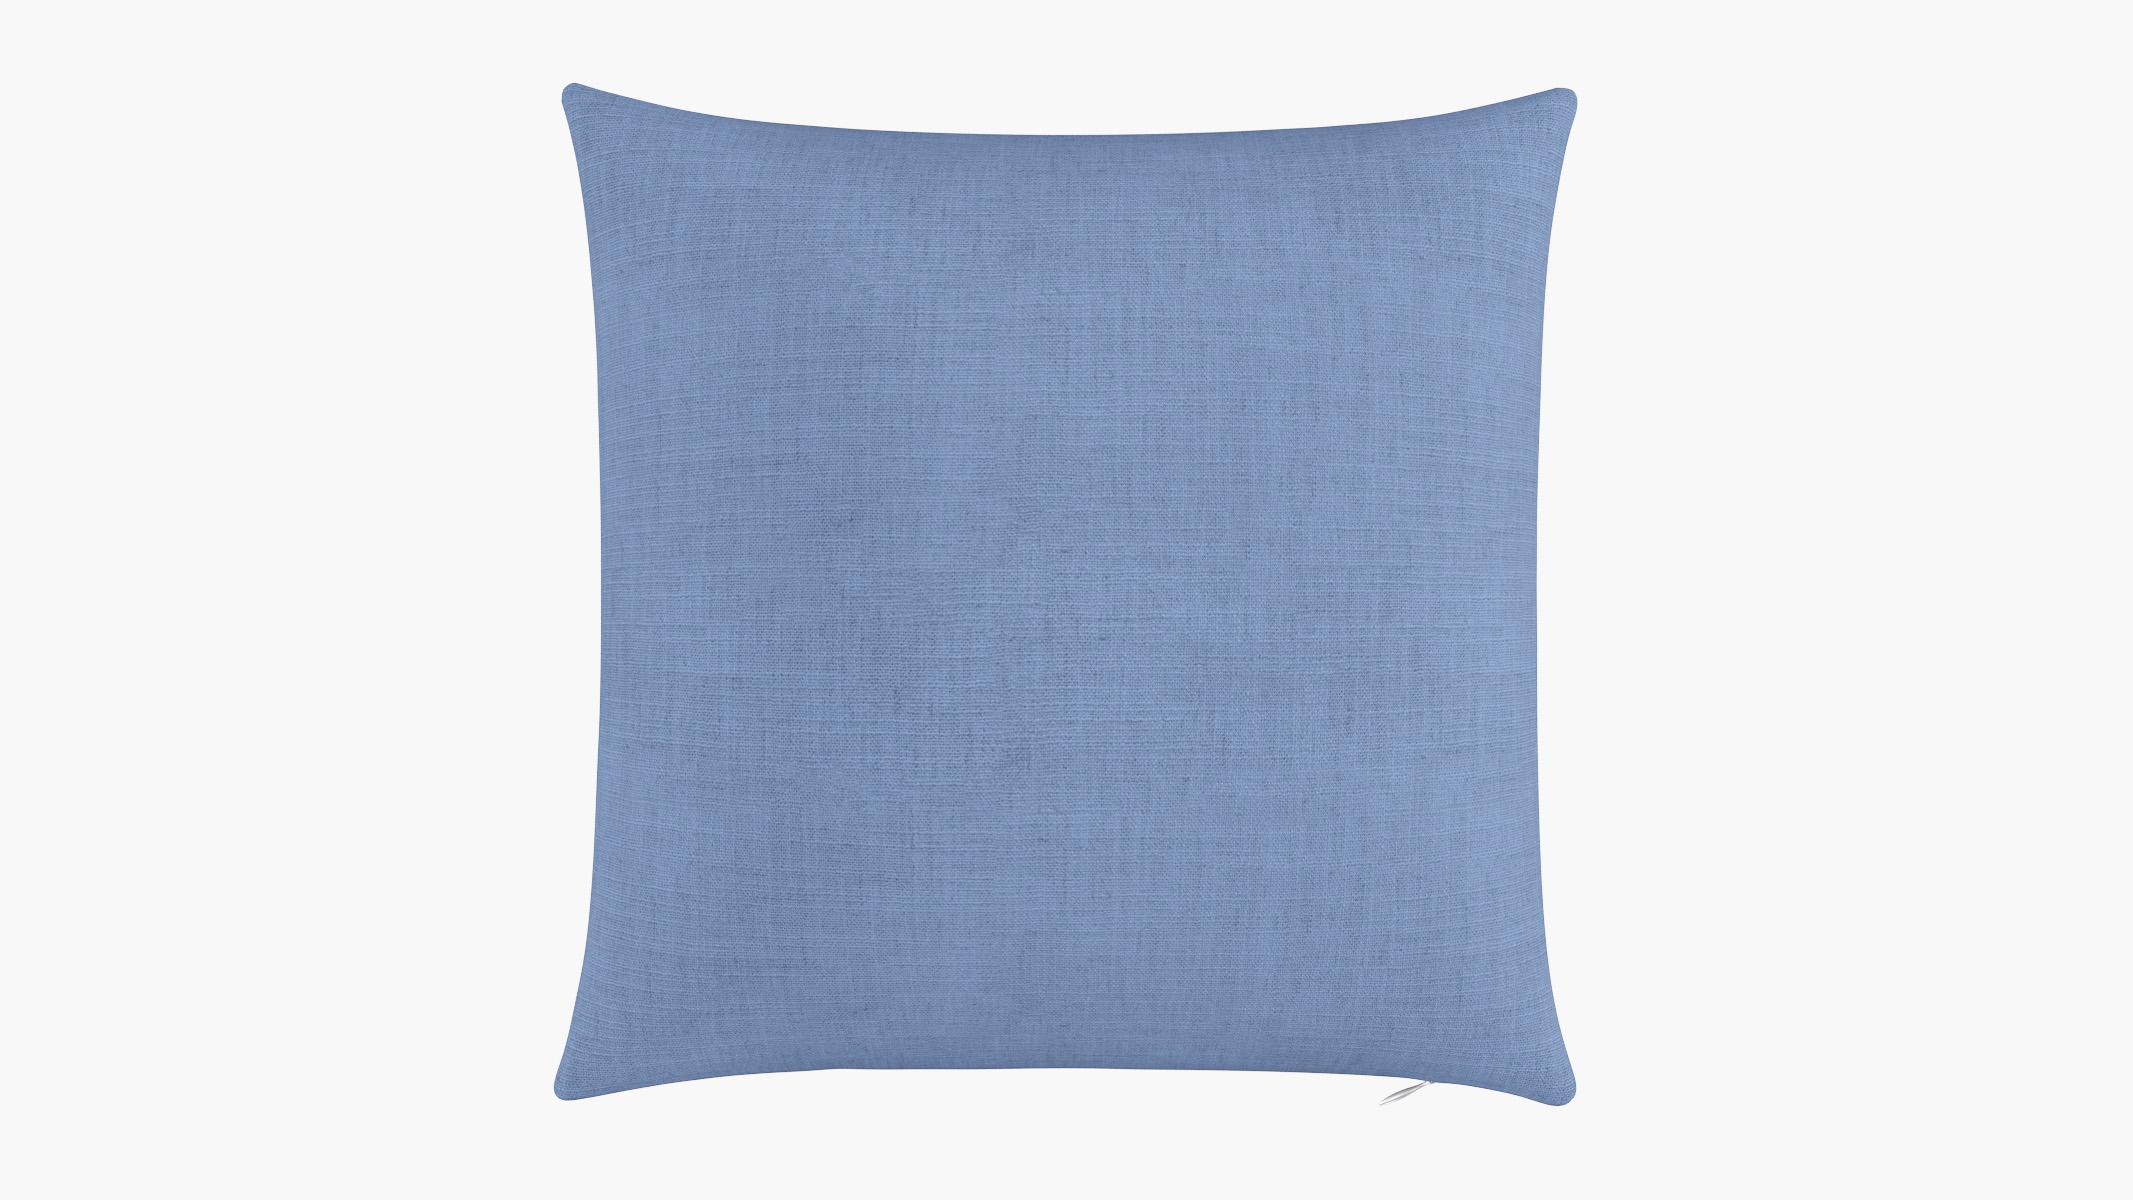 Throw Pillow 20", French Blue Linen, 20" x 20" - Image 0